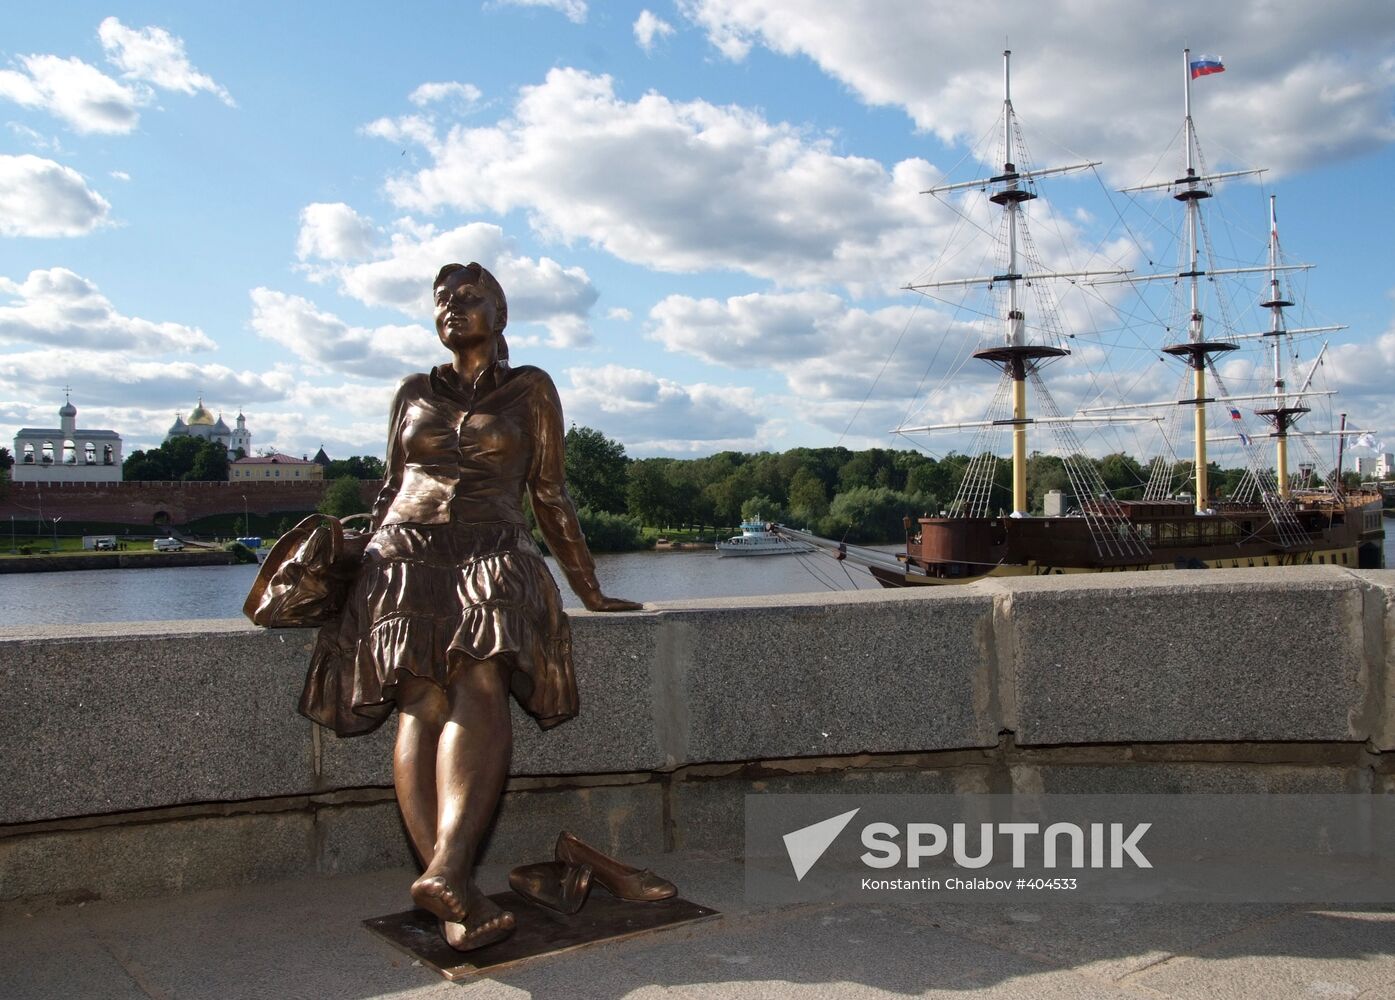 Sculpture "Girl Without Sandals" in Veliky Novgorod